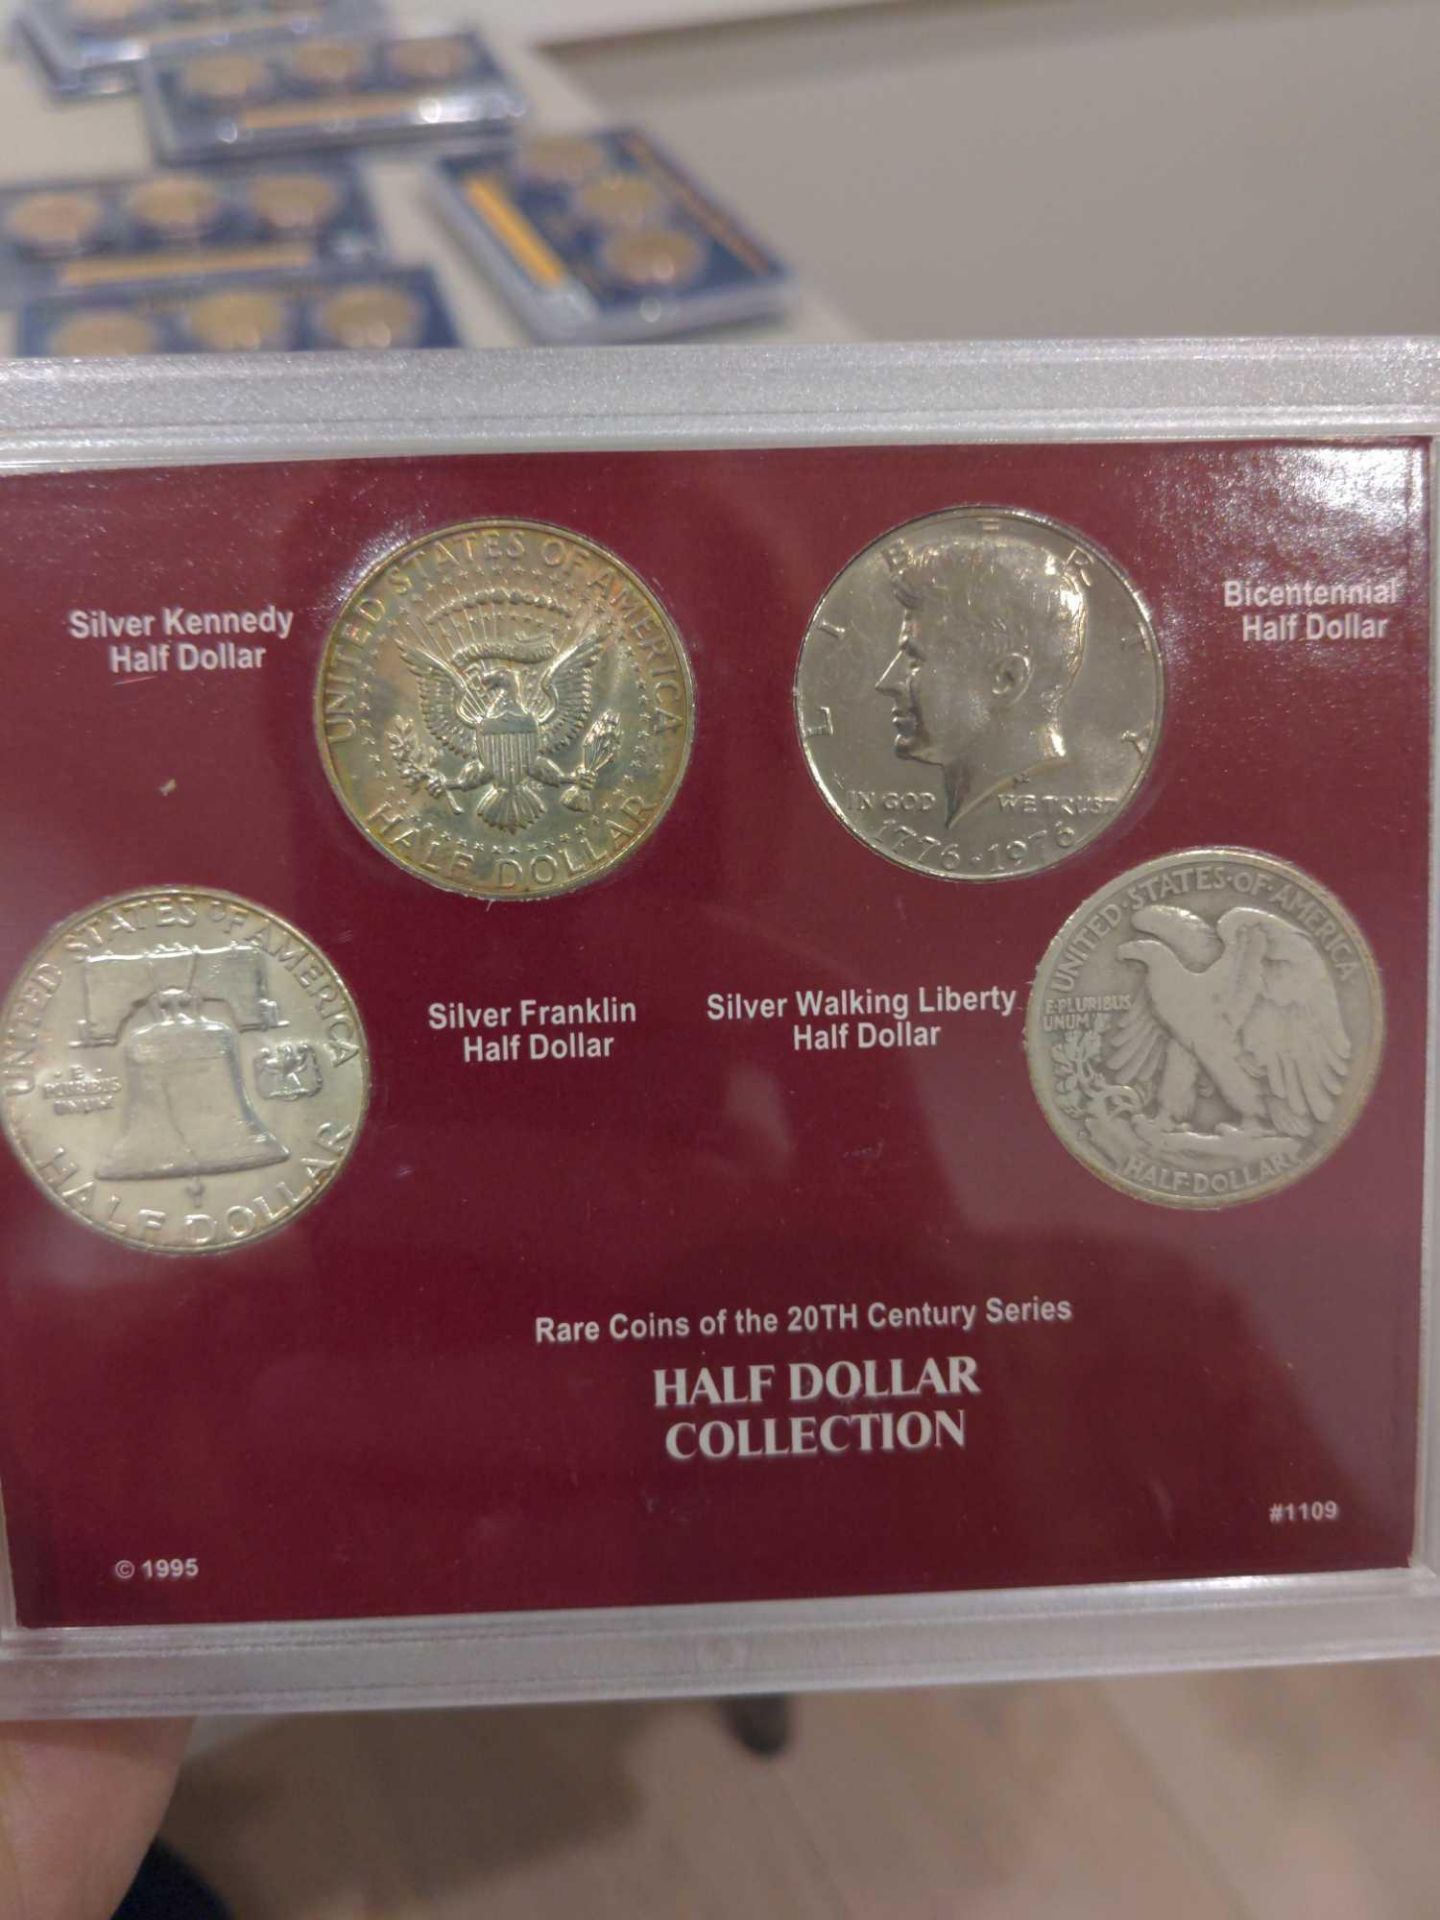 Rare coins of the 20th century sets, Half Dollar Collection and Dime and Quarter Collection - Image 4 of 5